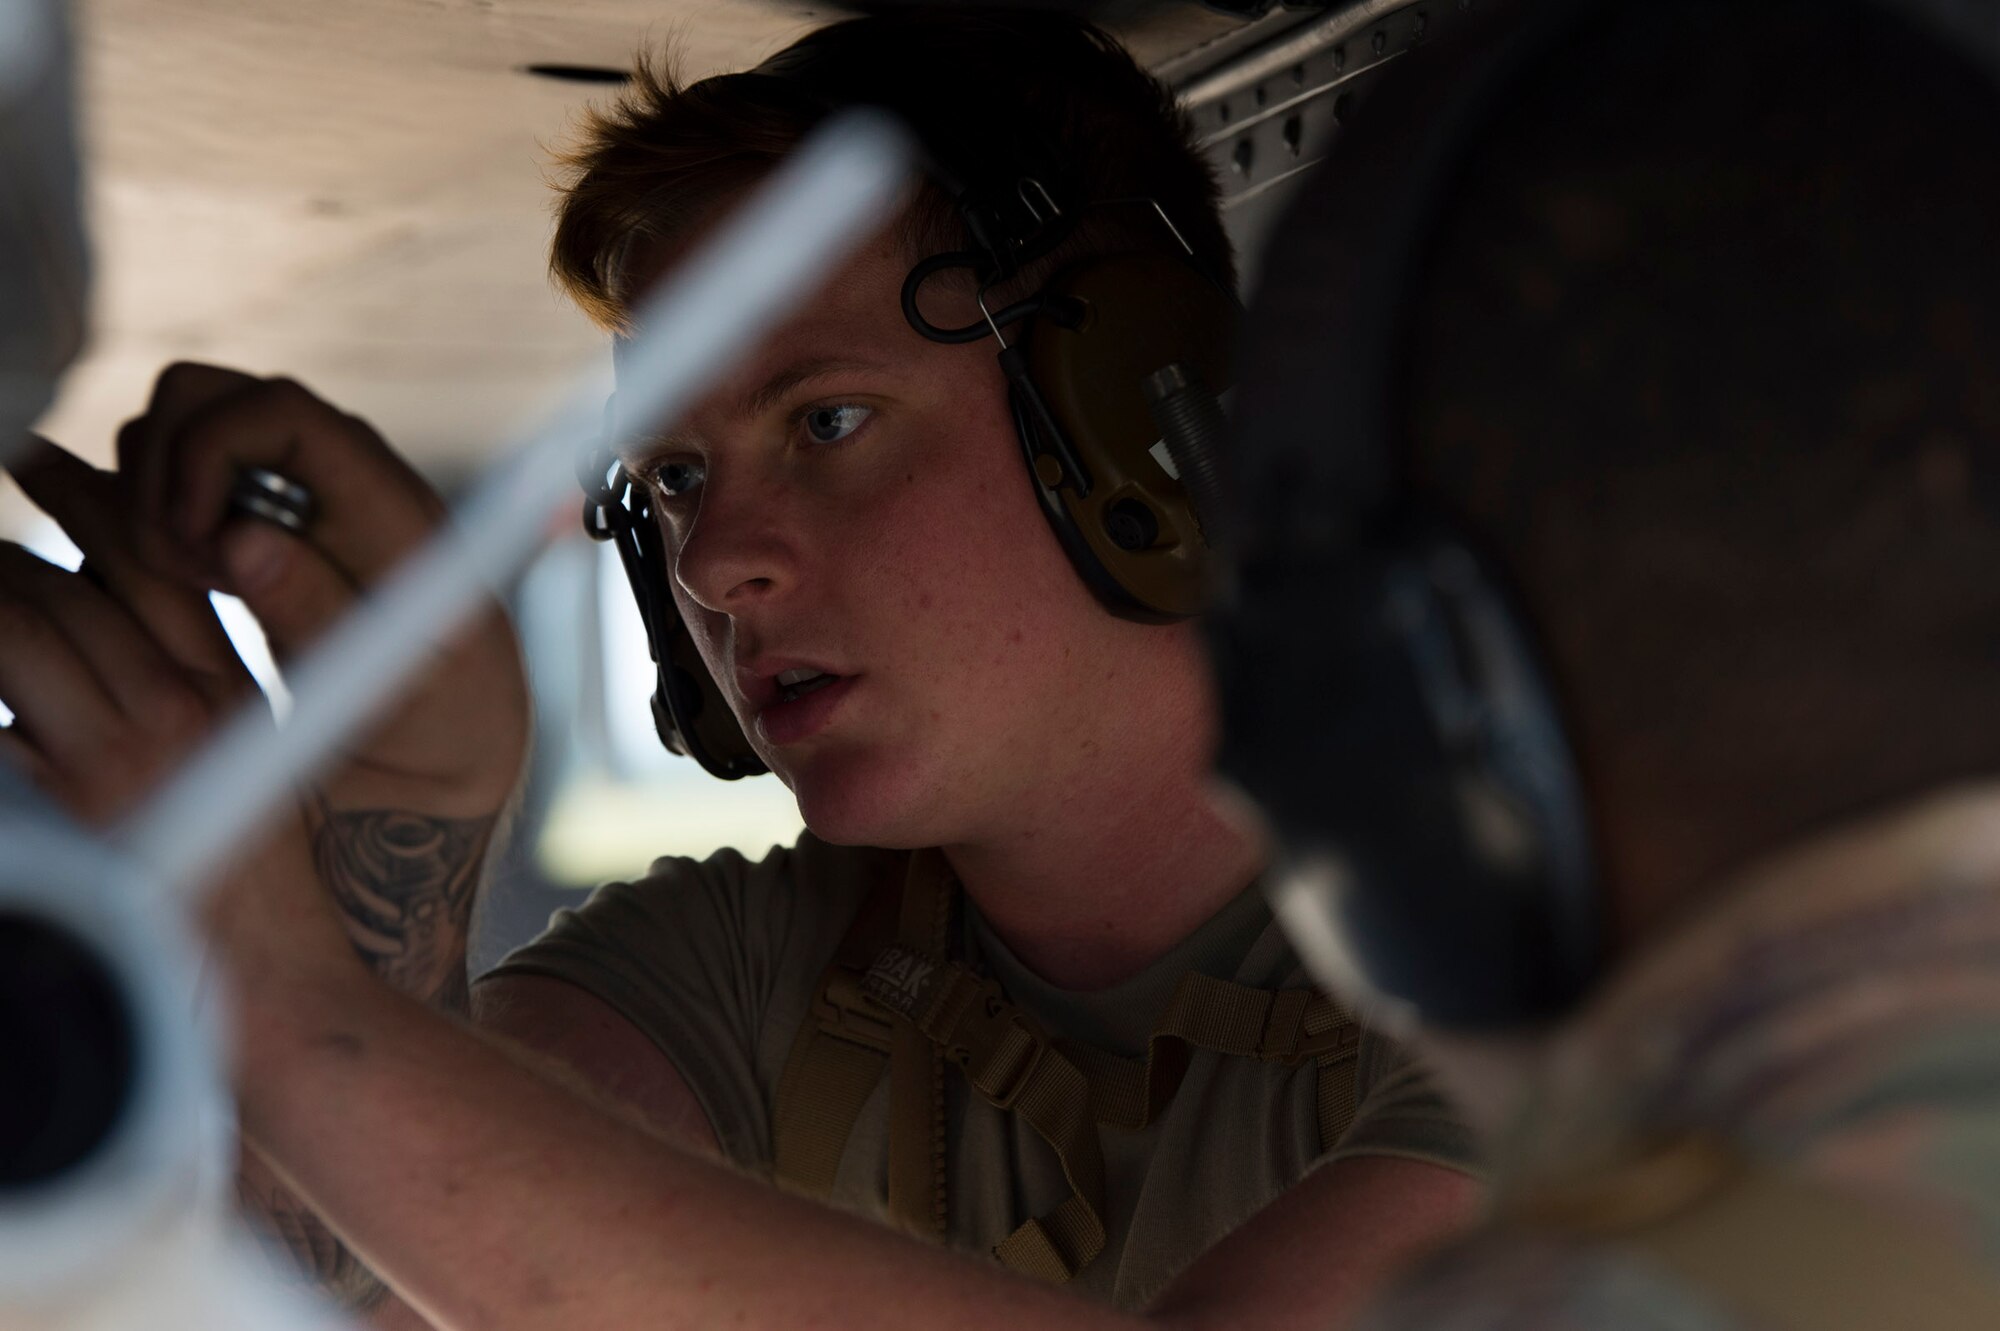 U.S. Air Force Senior Airman Dylan Holton, a weapons load crewmember assigned to the 23rd Aircraft Maintenance Squadron, Moody Air Force Base, Ga., secures a weapon on an A-10 Thunderbolt II assigned to the 74th Fighter Squadron, Moody AFB, for Exercise Mobile Tiger Nov. 19, 2019 on MacDill Air Force Base, Fla.